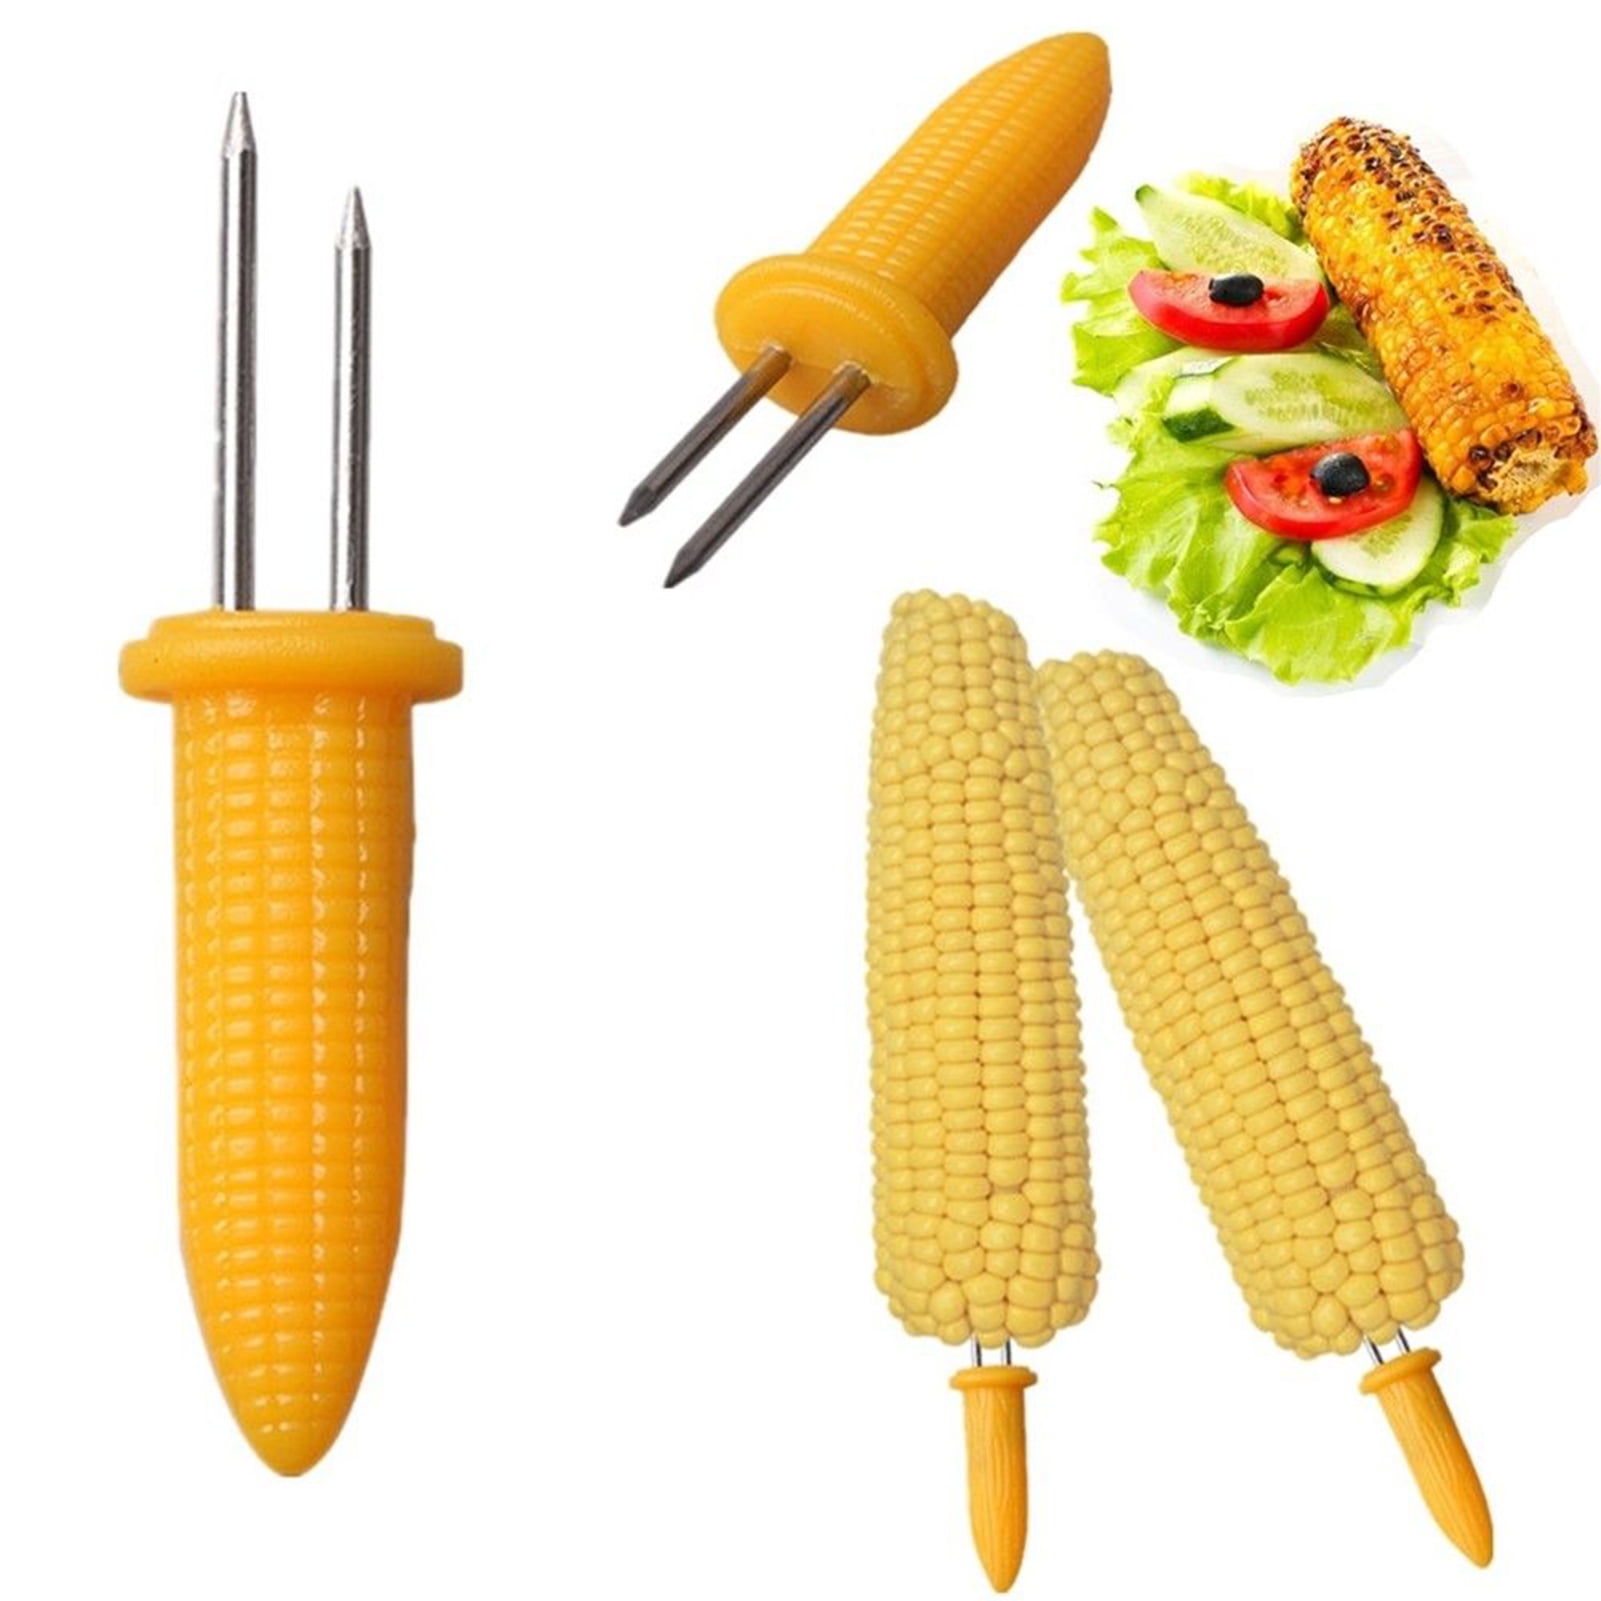 10 x Stainless Steel Corn On The Cob Holders BBQ Prongs Skewers Forks Party N SM 